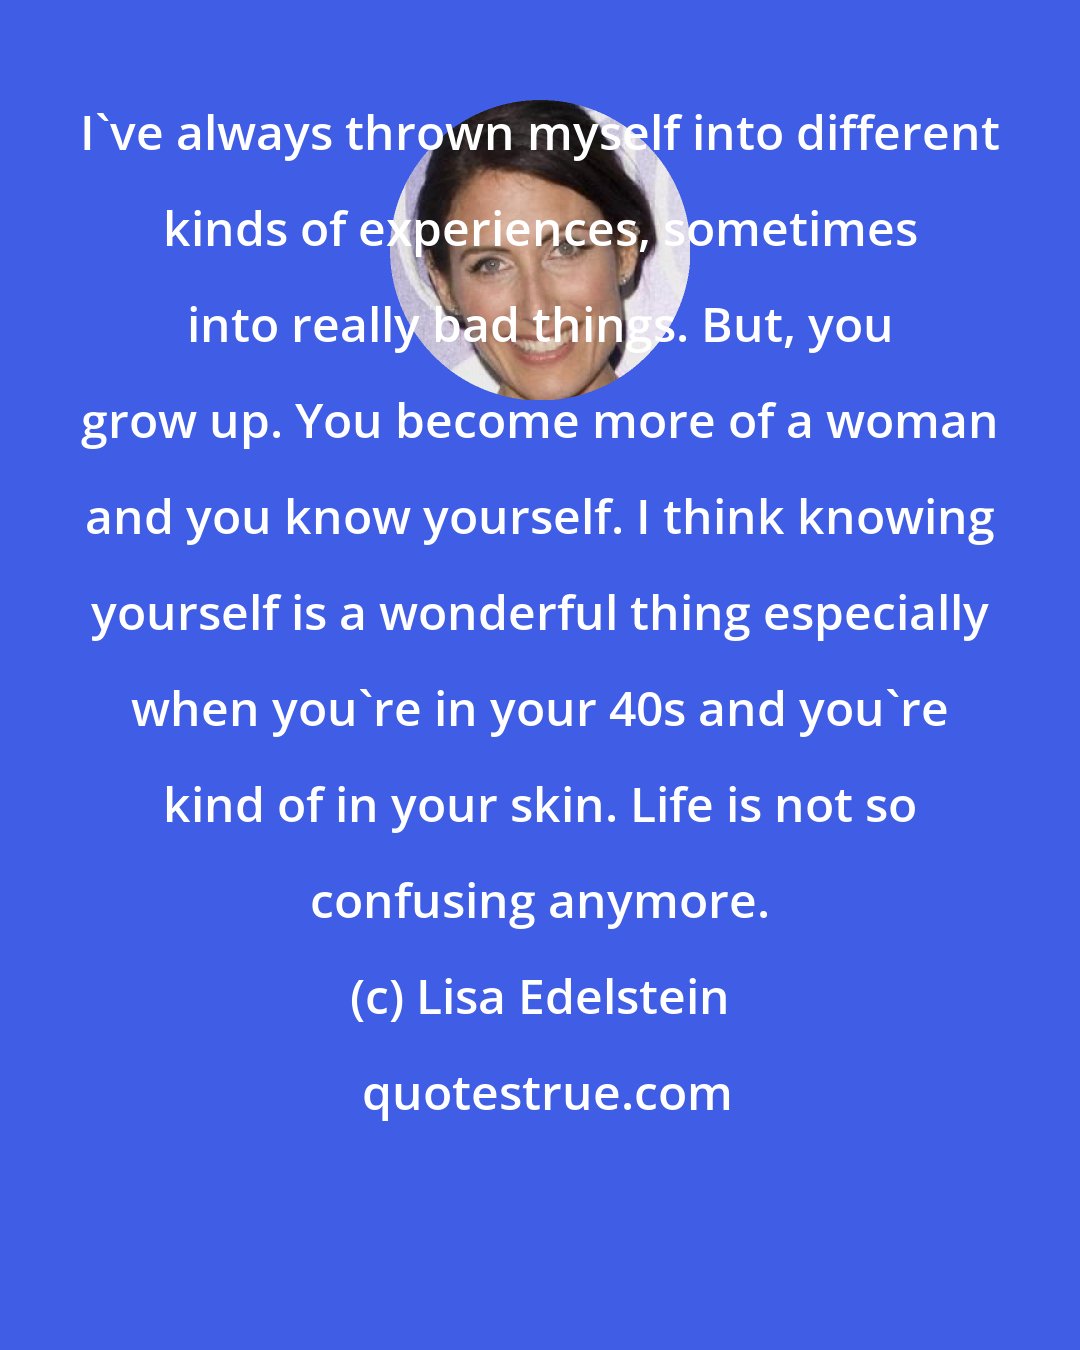 Lisa Edelstein: I've always thrown myself into different kinds of experiences, sometimes into really bad things. But, you grow up. You become more of a woman and you know yourself. I think knowing yourself is a wonderful thing especially when you're in your 40s and you're kind of in your skin. Life is not so confusing anymore.